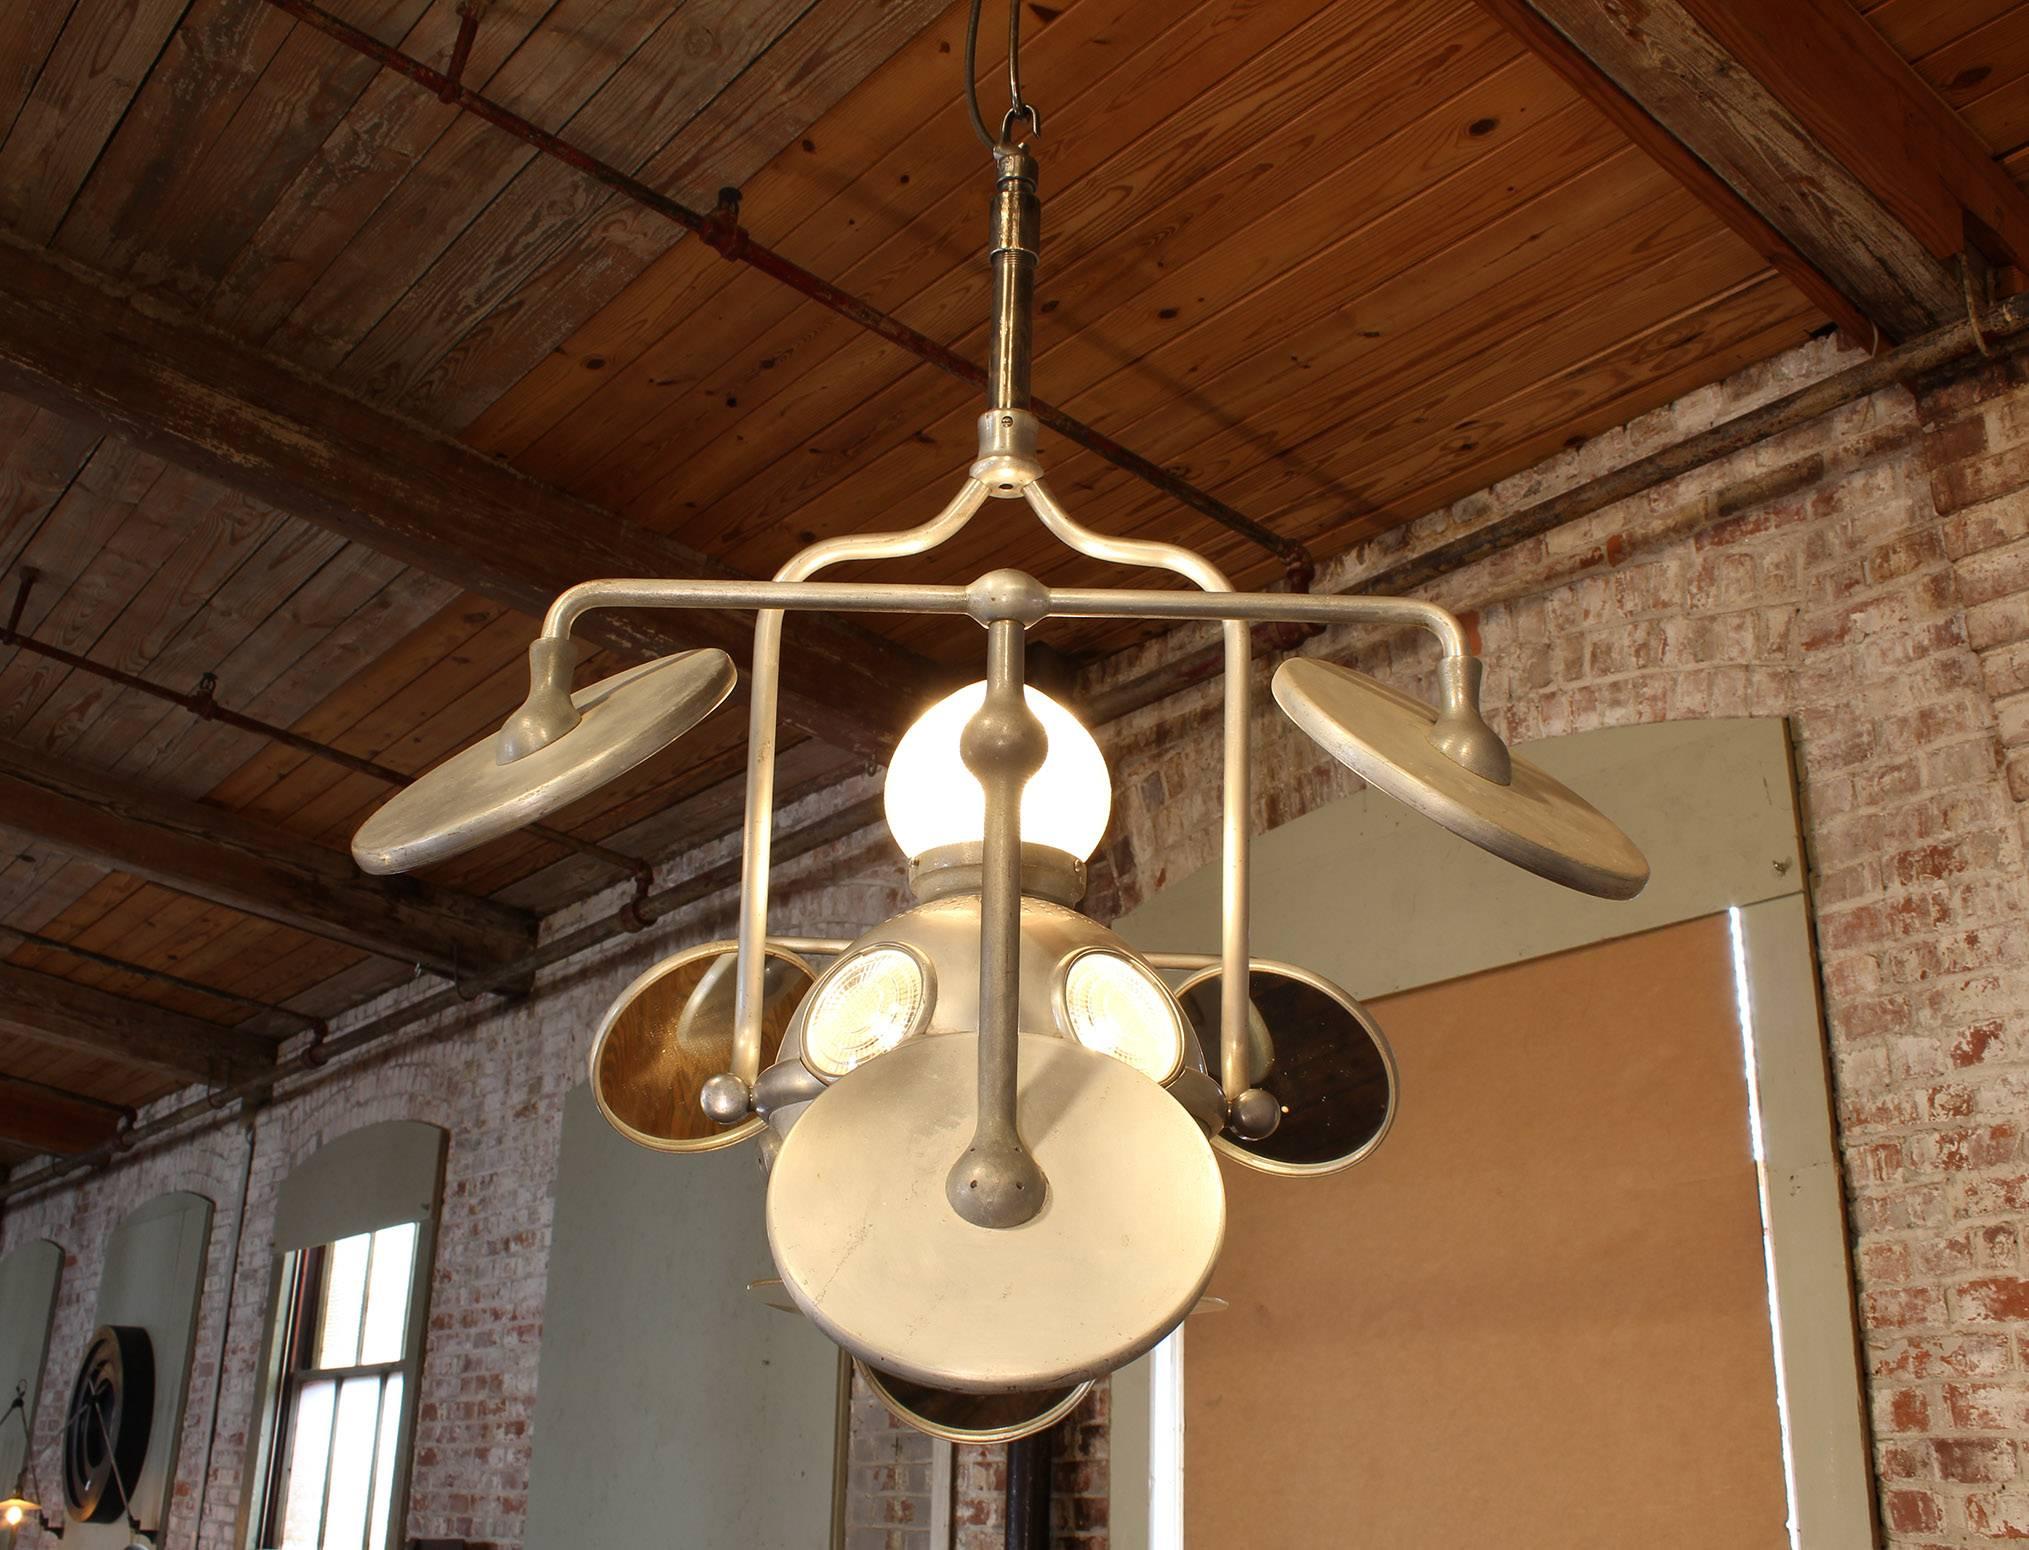 Authentic vintage industrial multi-beam surgical pendant light made by Operay. Measures: 34